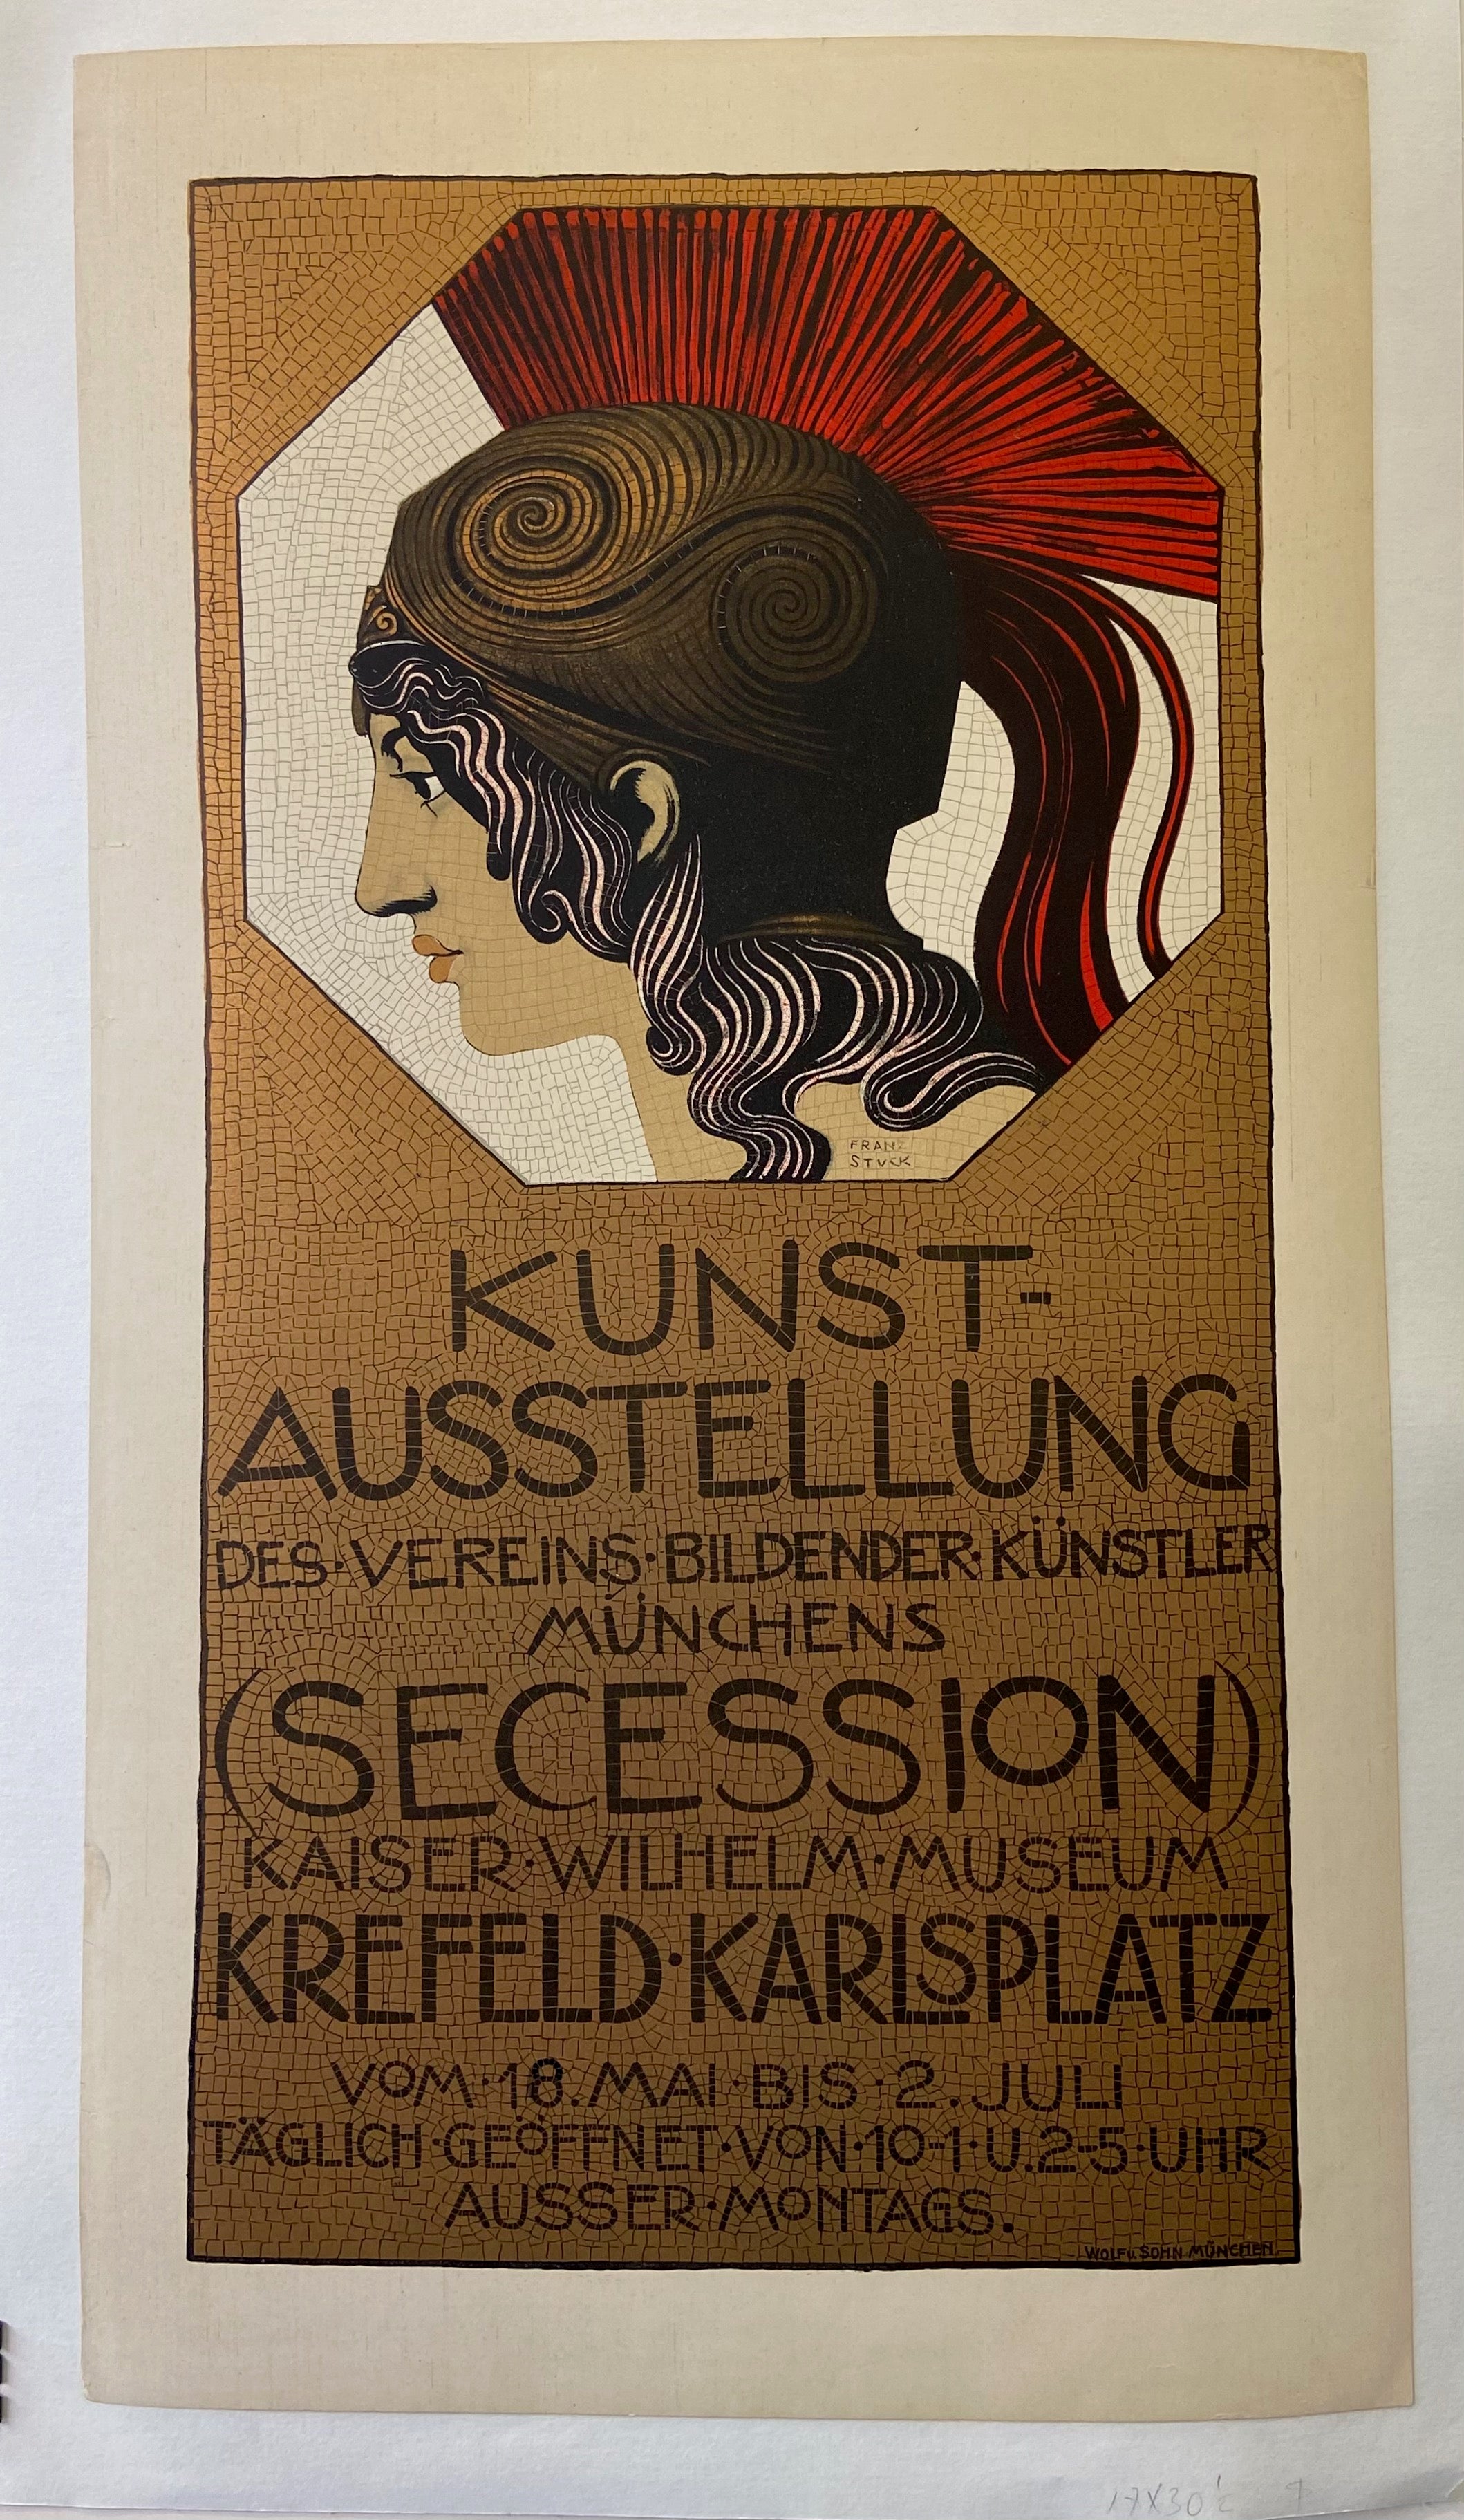 Poster for an art exhibition in Krefeld